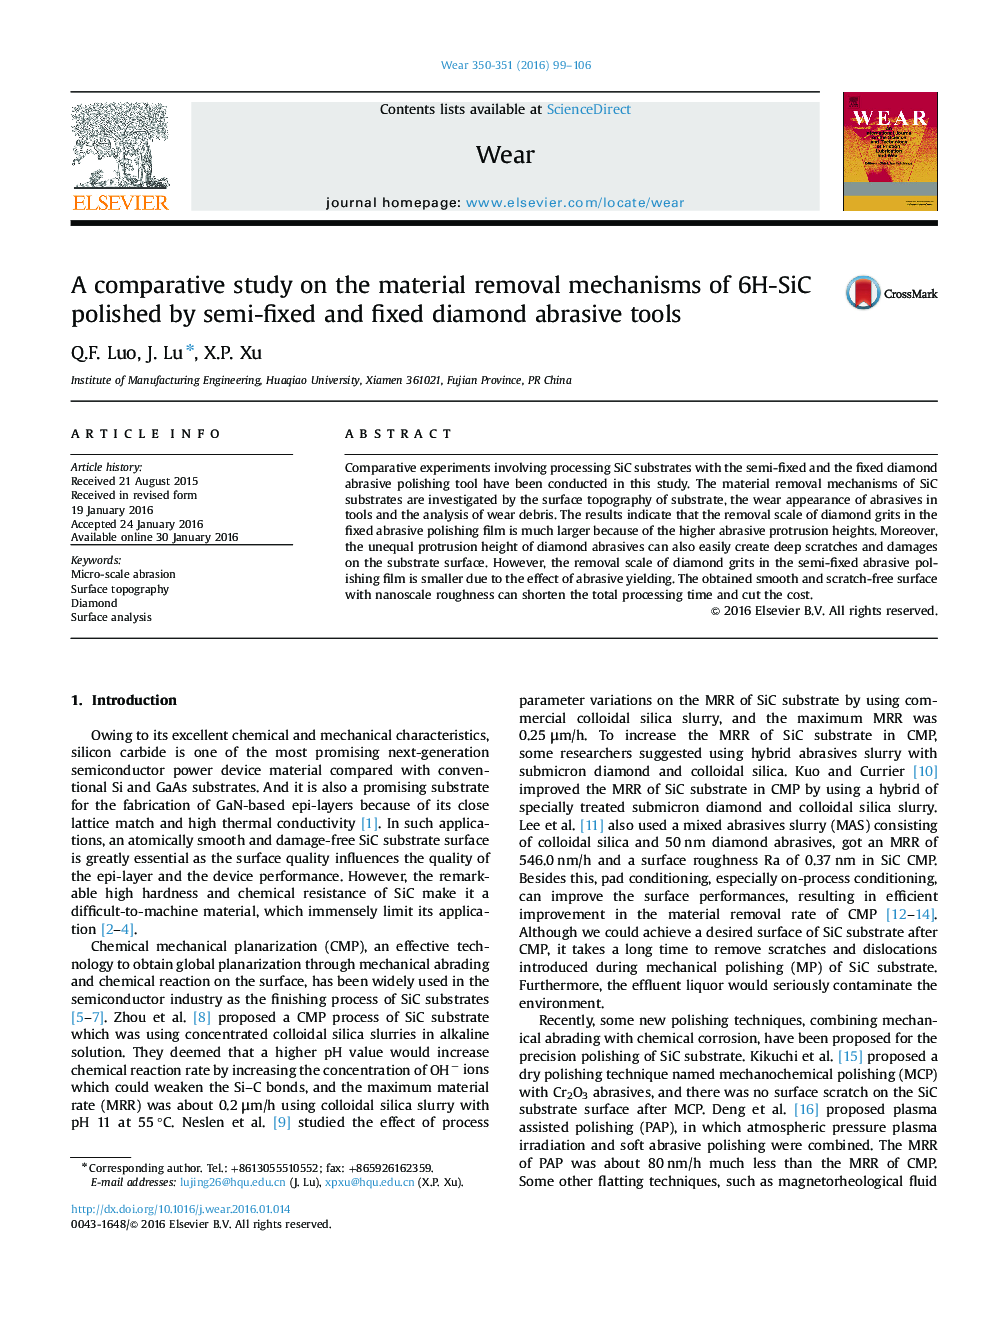 A comparative study on the material removal mechanisms of 6H-SiC polished by semi-fixed and fixed diamond abrasive tools